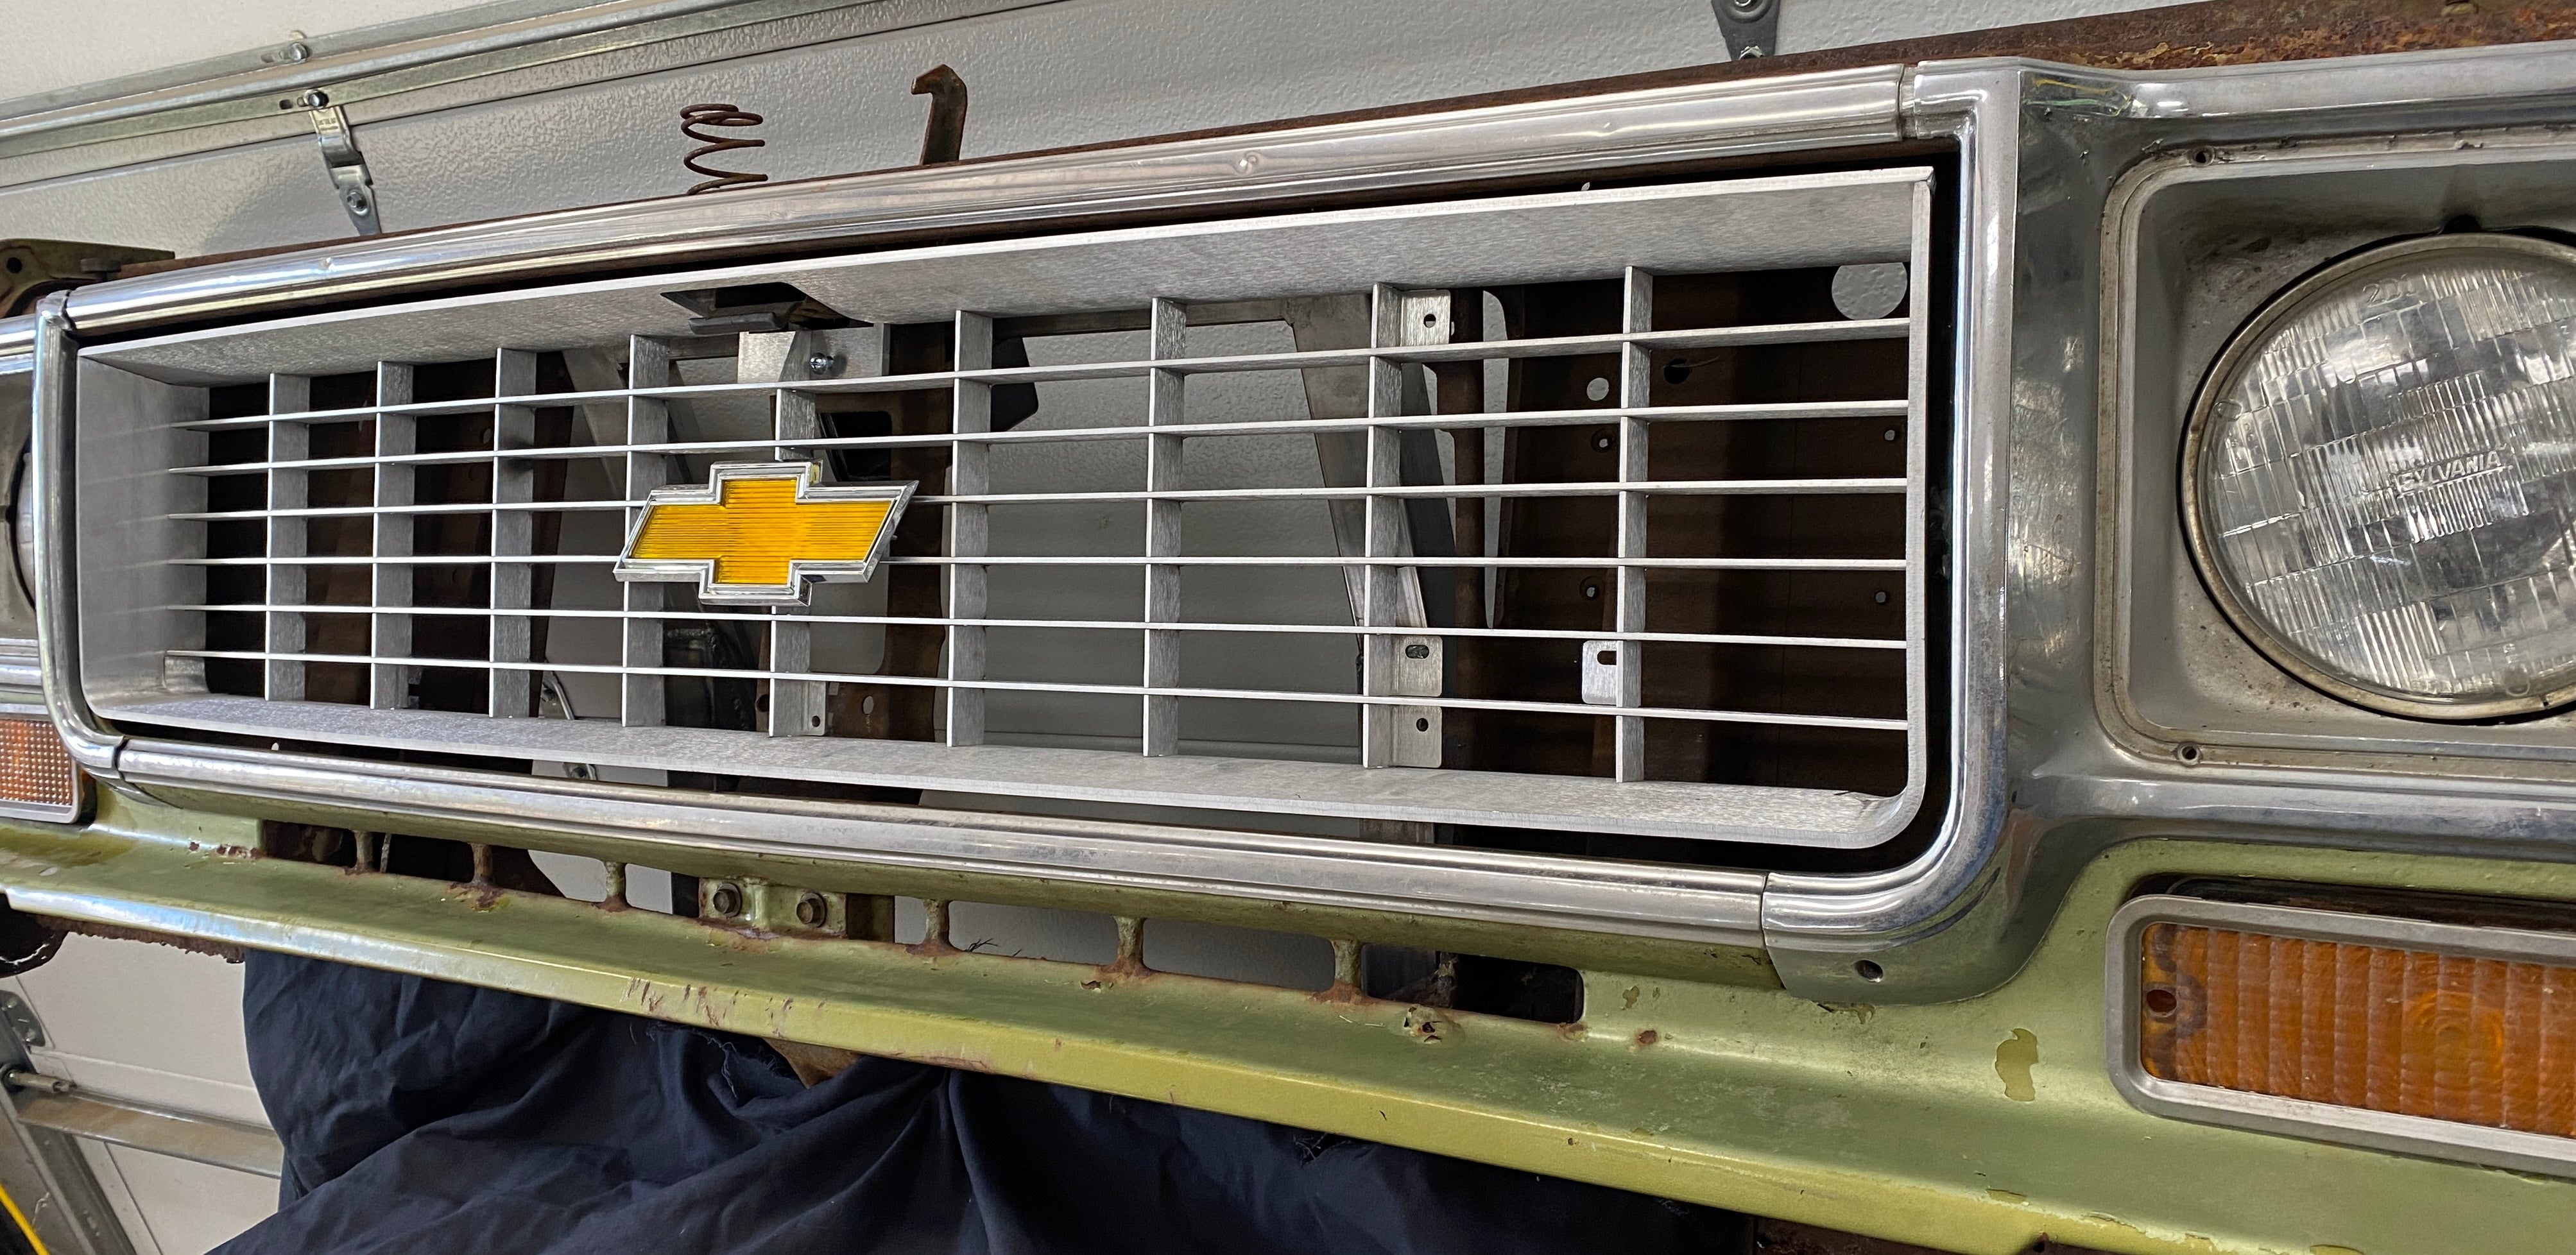 Grille AF (Aluminum Fabricated) 1973-74 Chevrolet Truck | Engineered Vintage | Custom Grilles for Classic Trucks